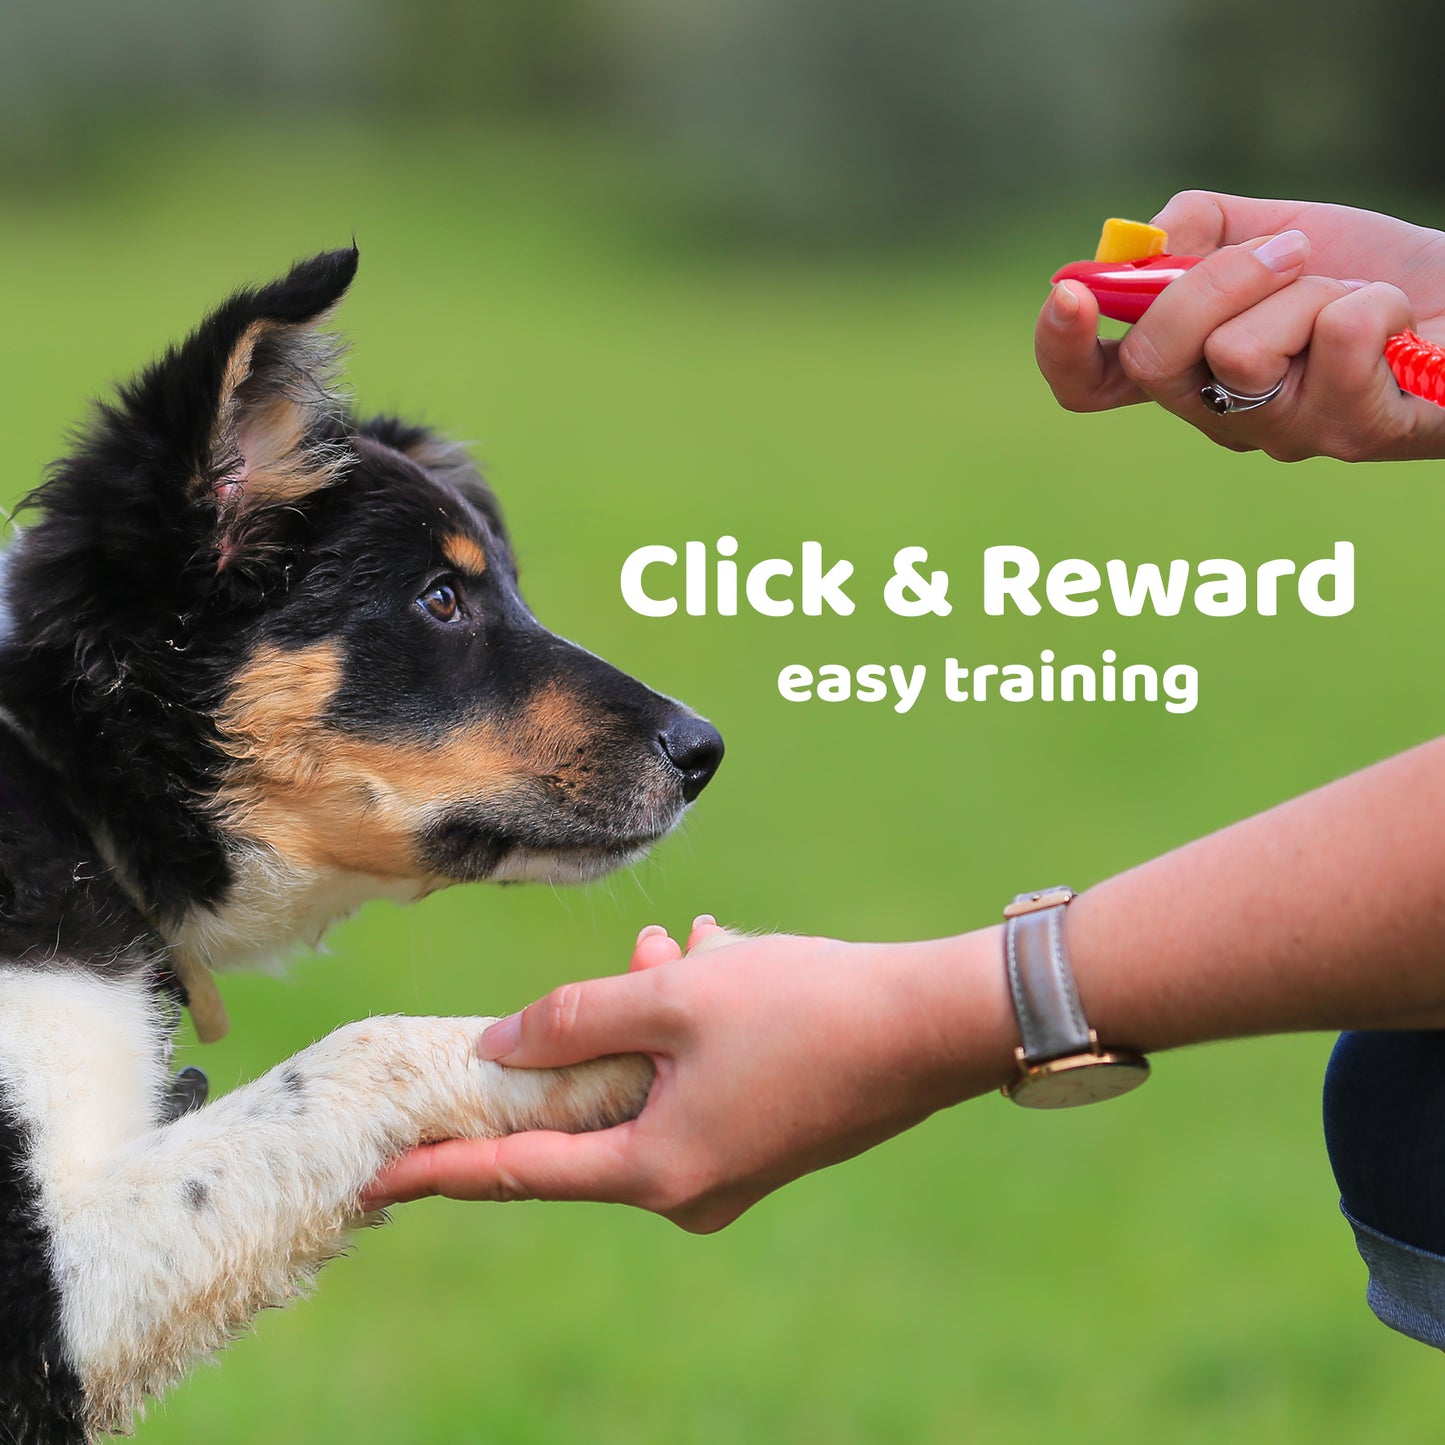 Dog Clicker for Training with Wrist Band - Multi-Pack Options